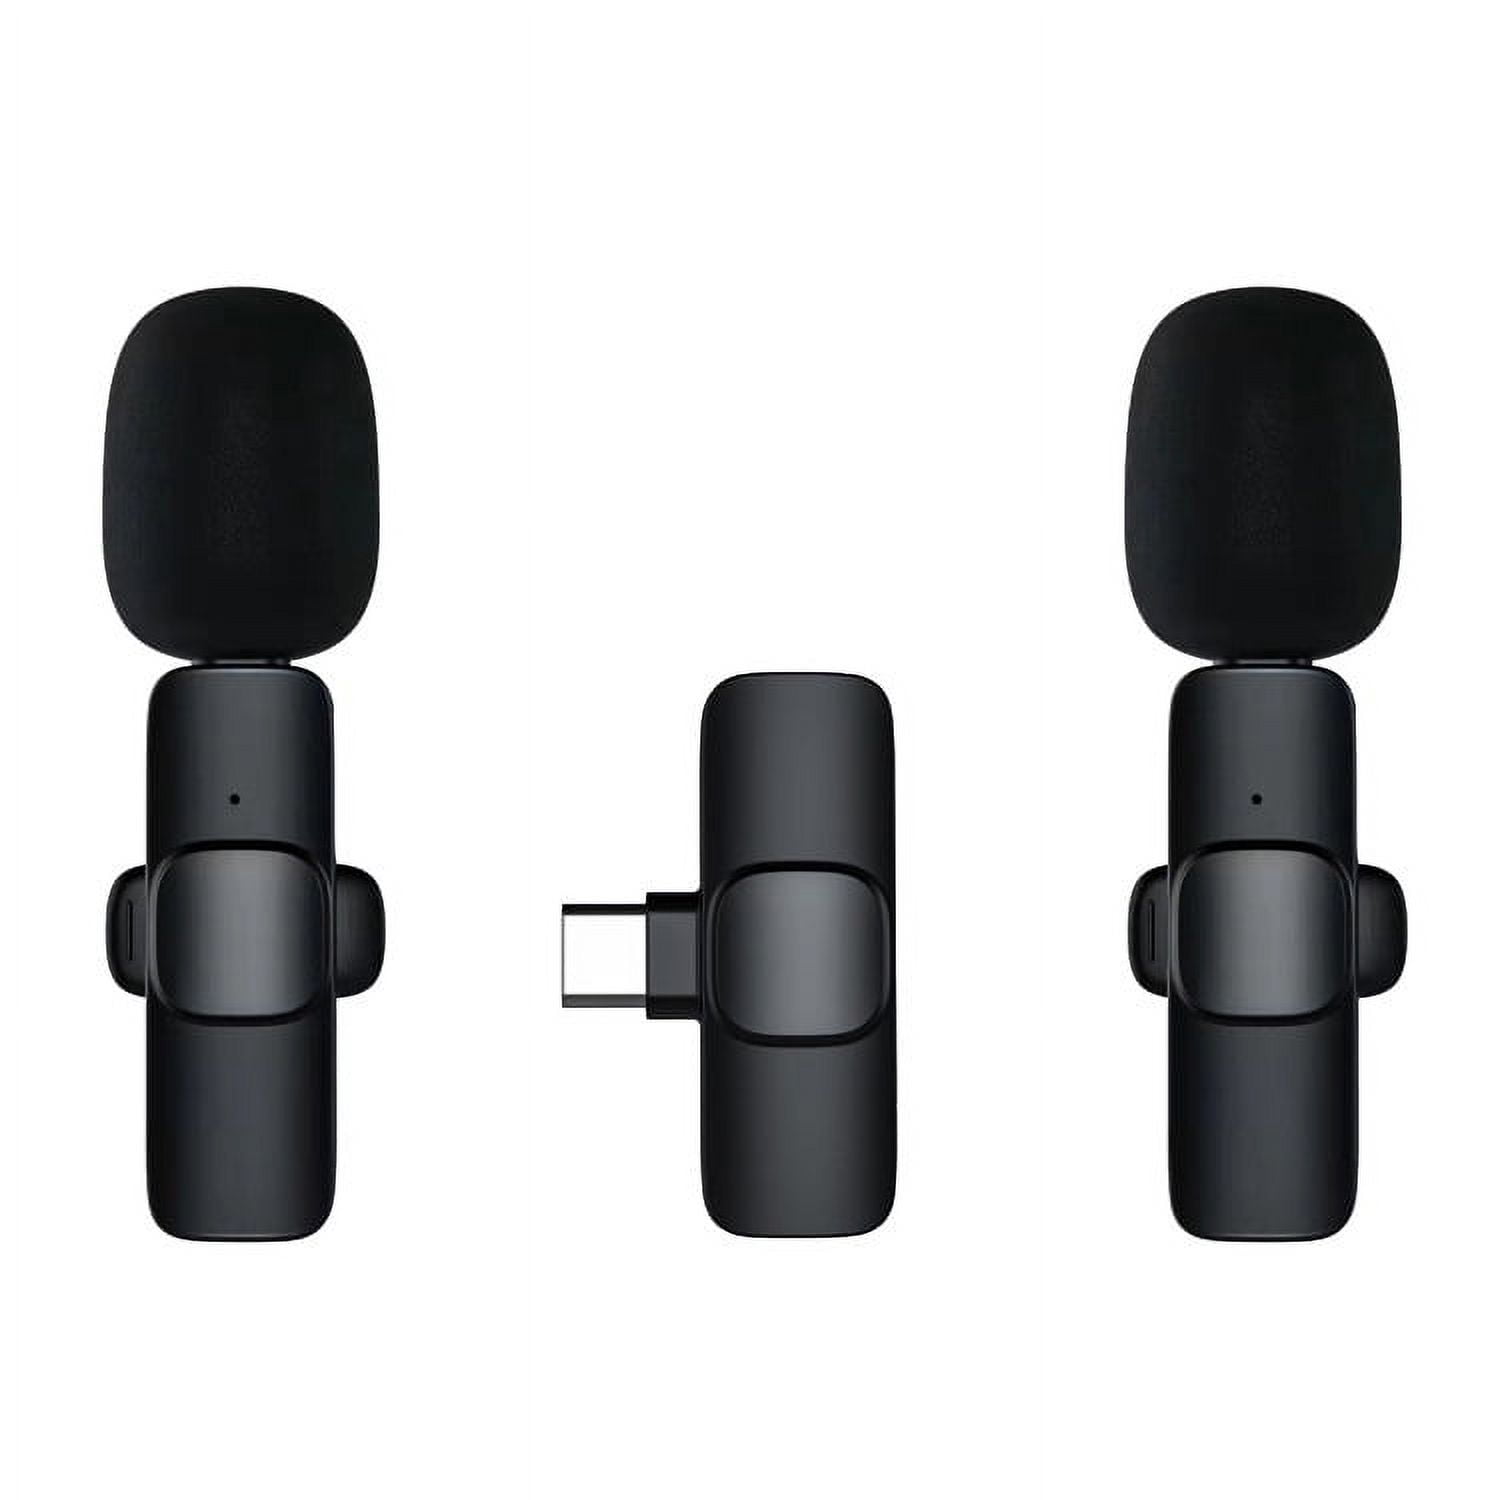  OPULENO 2 Pcs Wireless Lavalier Microphones for iPhone and  iPad, Wireless Noise-Cancelling Microphone, Professional Wireless Lavalier  Microphone for Recording, Live Stream, , Facebook (Black) : Musical  Instruments